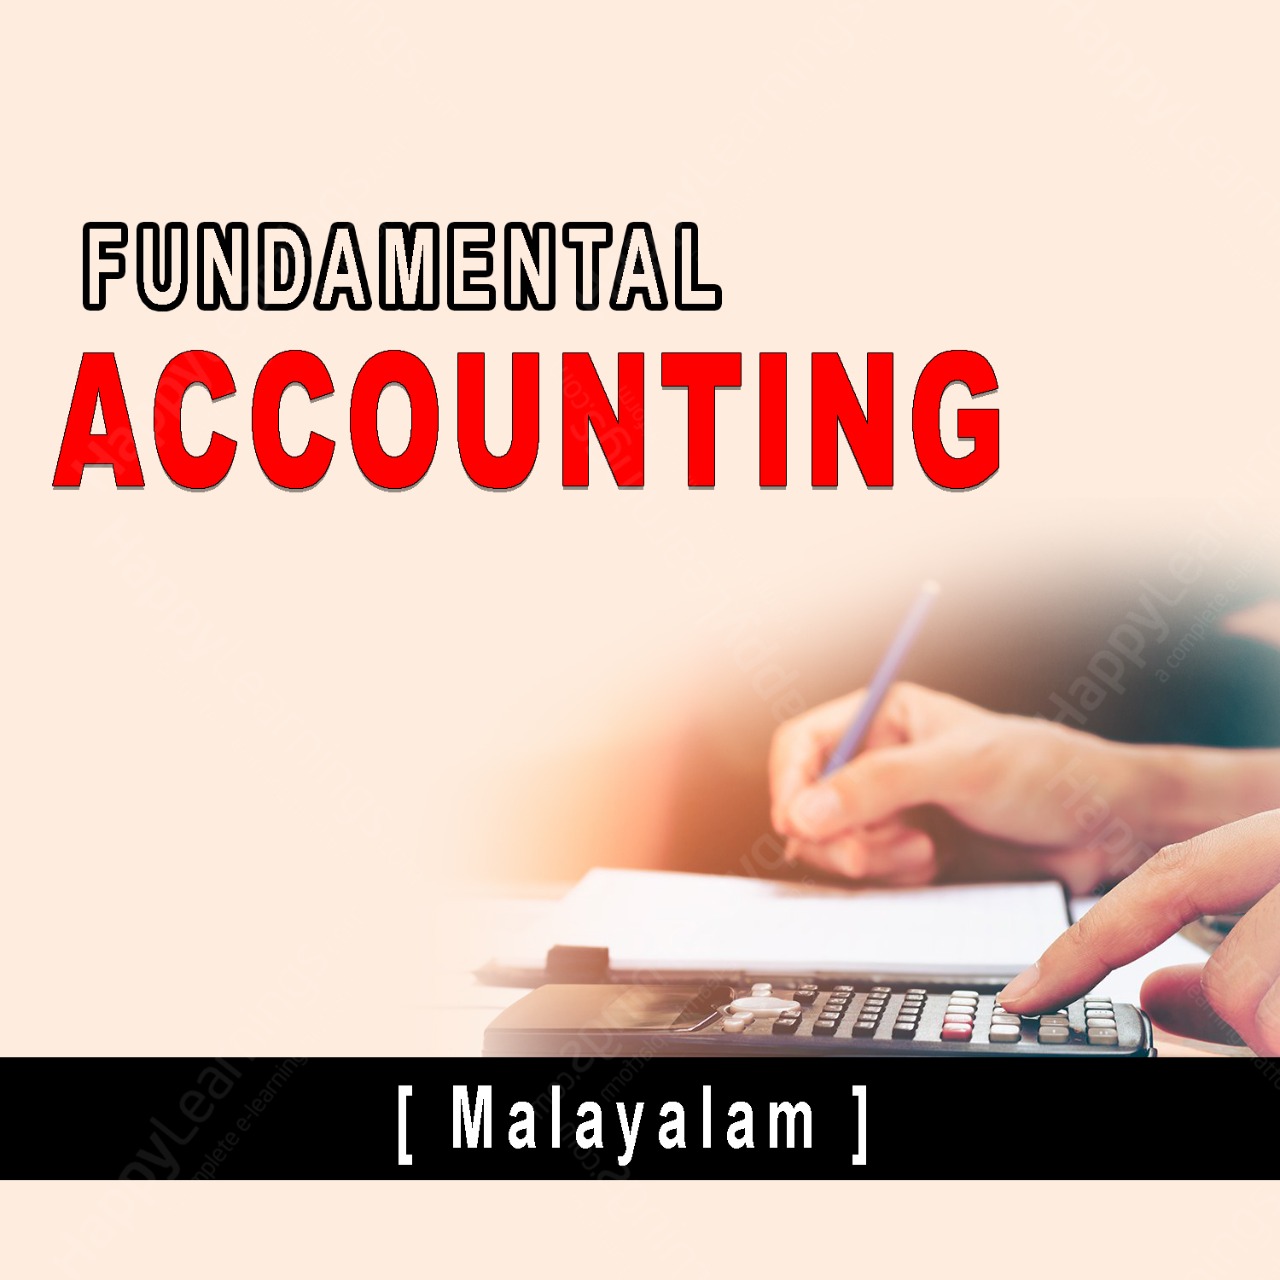 Accounting Fundamentals- For Beginners